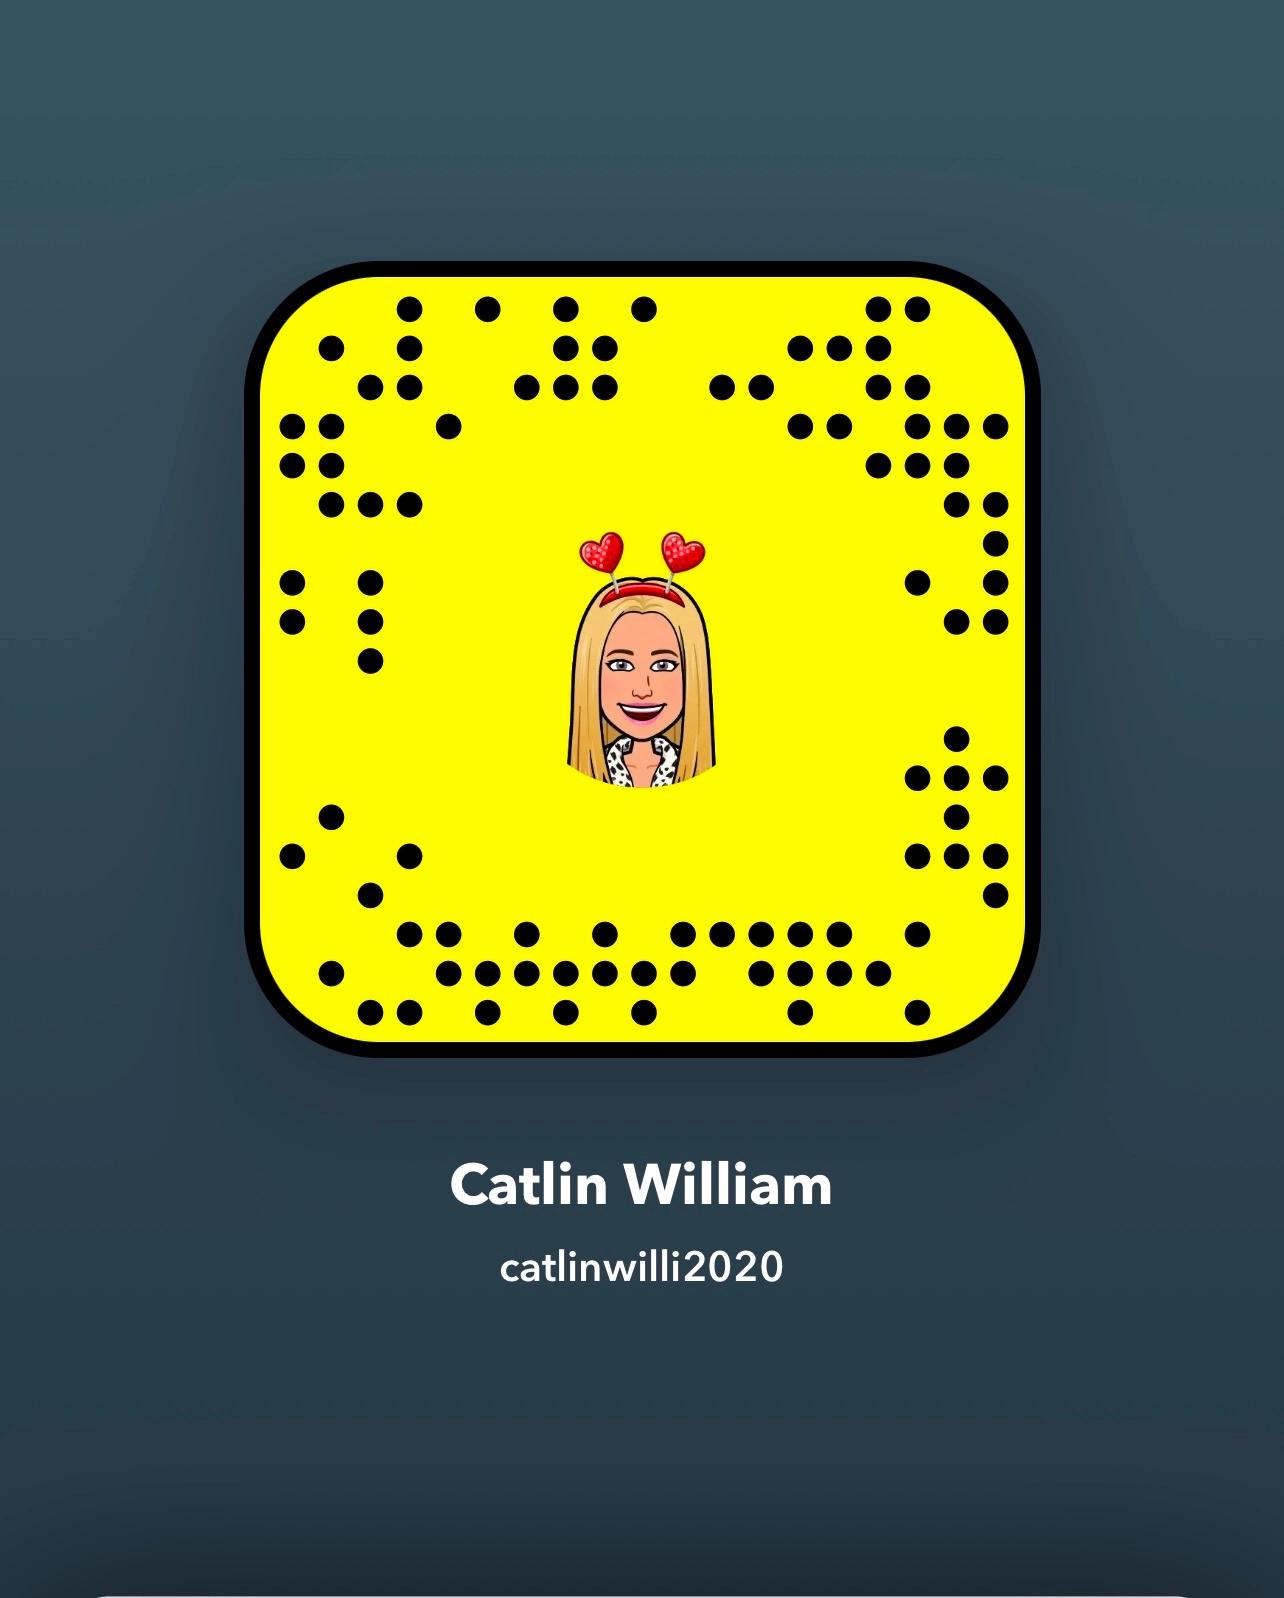 IF YOU DOWN FOR FUN AND MEETUP Text ME on 661 888 8096 Snap👻Catlinwilli2020